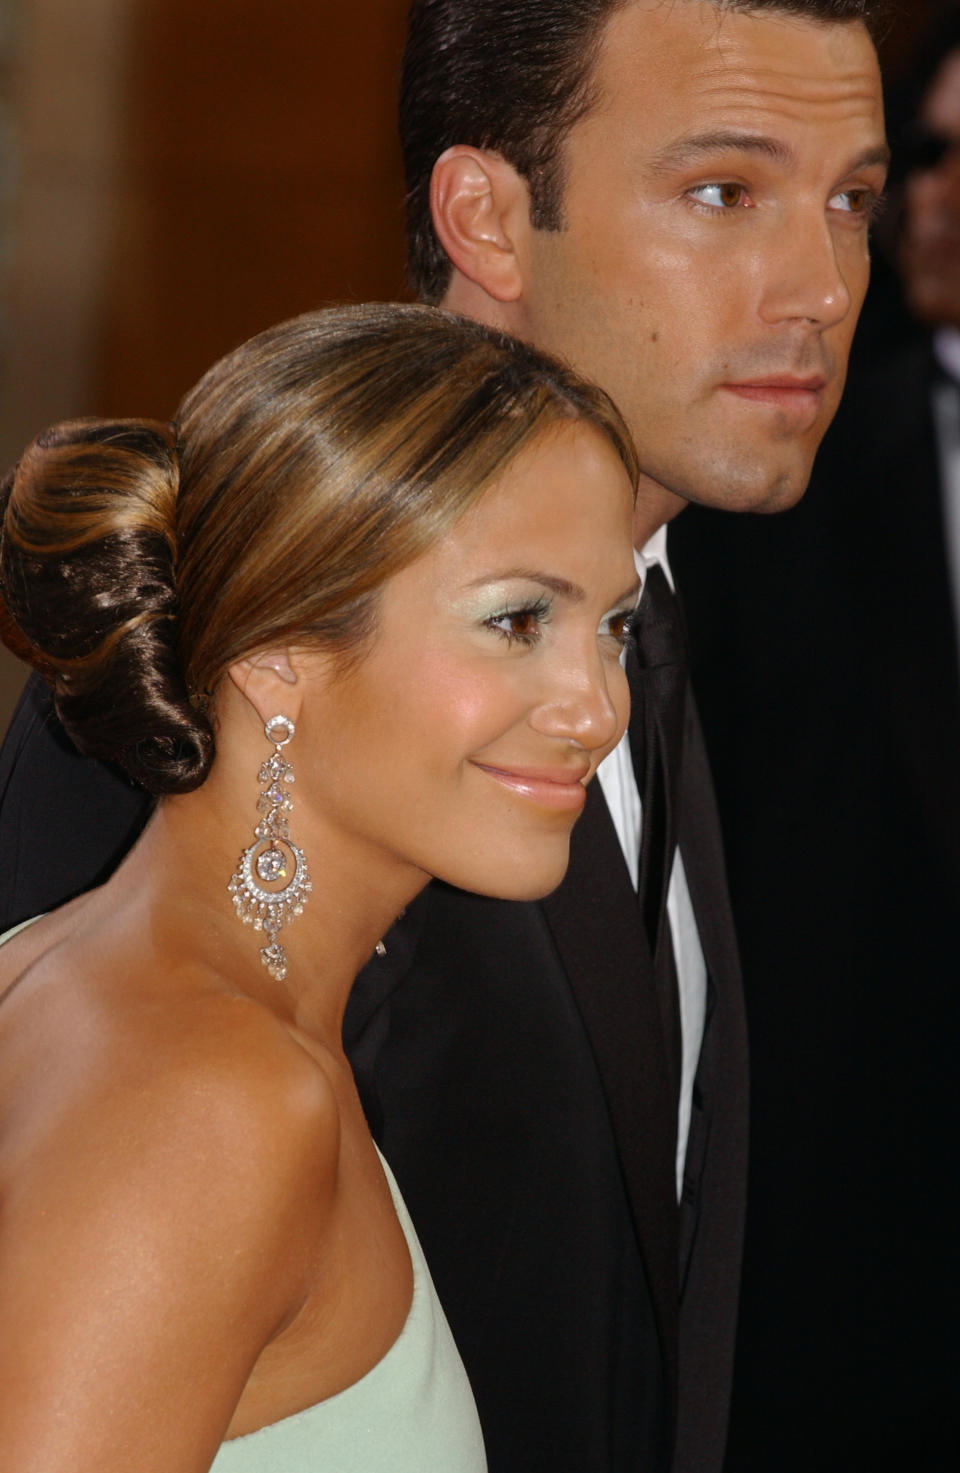 Jennifer Lopez (diamond earrings by Fred Leighton) and Ben Affleck arriving at the 75th Annual Academy Awards. (Photo by Frank Trapper/Corbis via Getty Images)